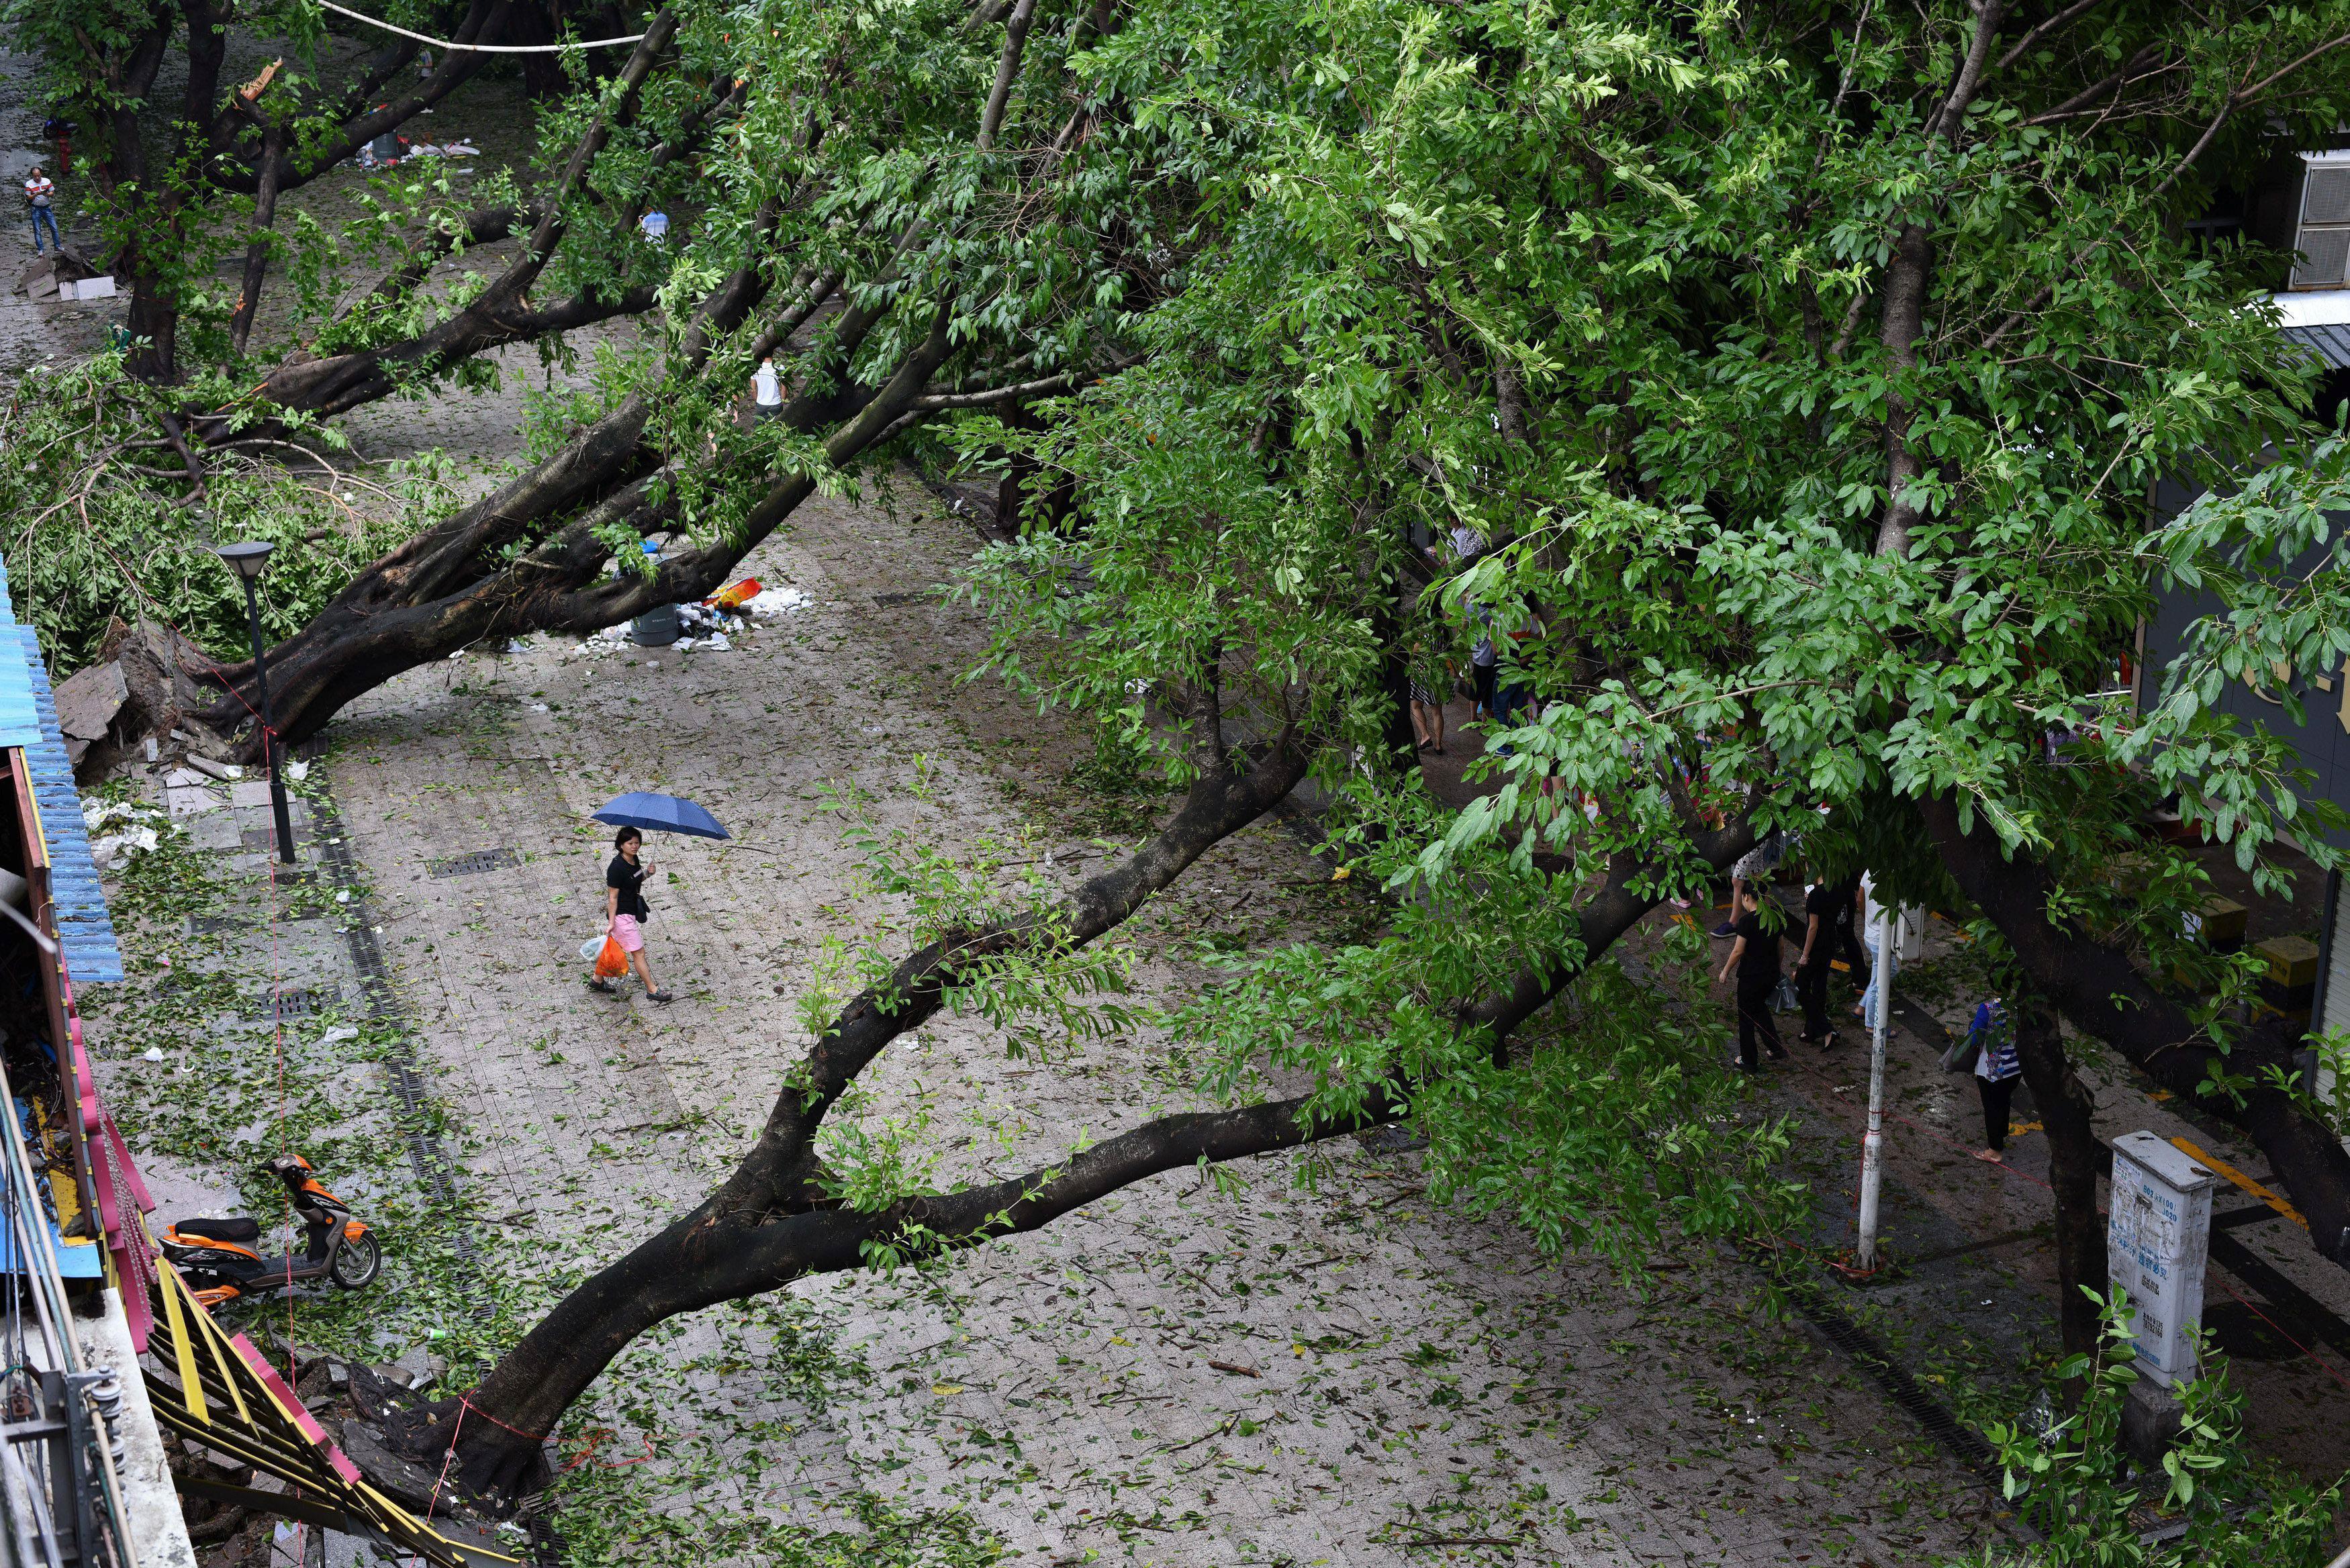 A woman walks past unrooted trees after Typhoon Nida in Shenzhen